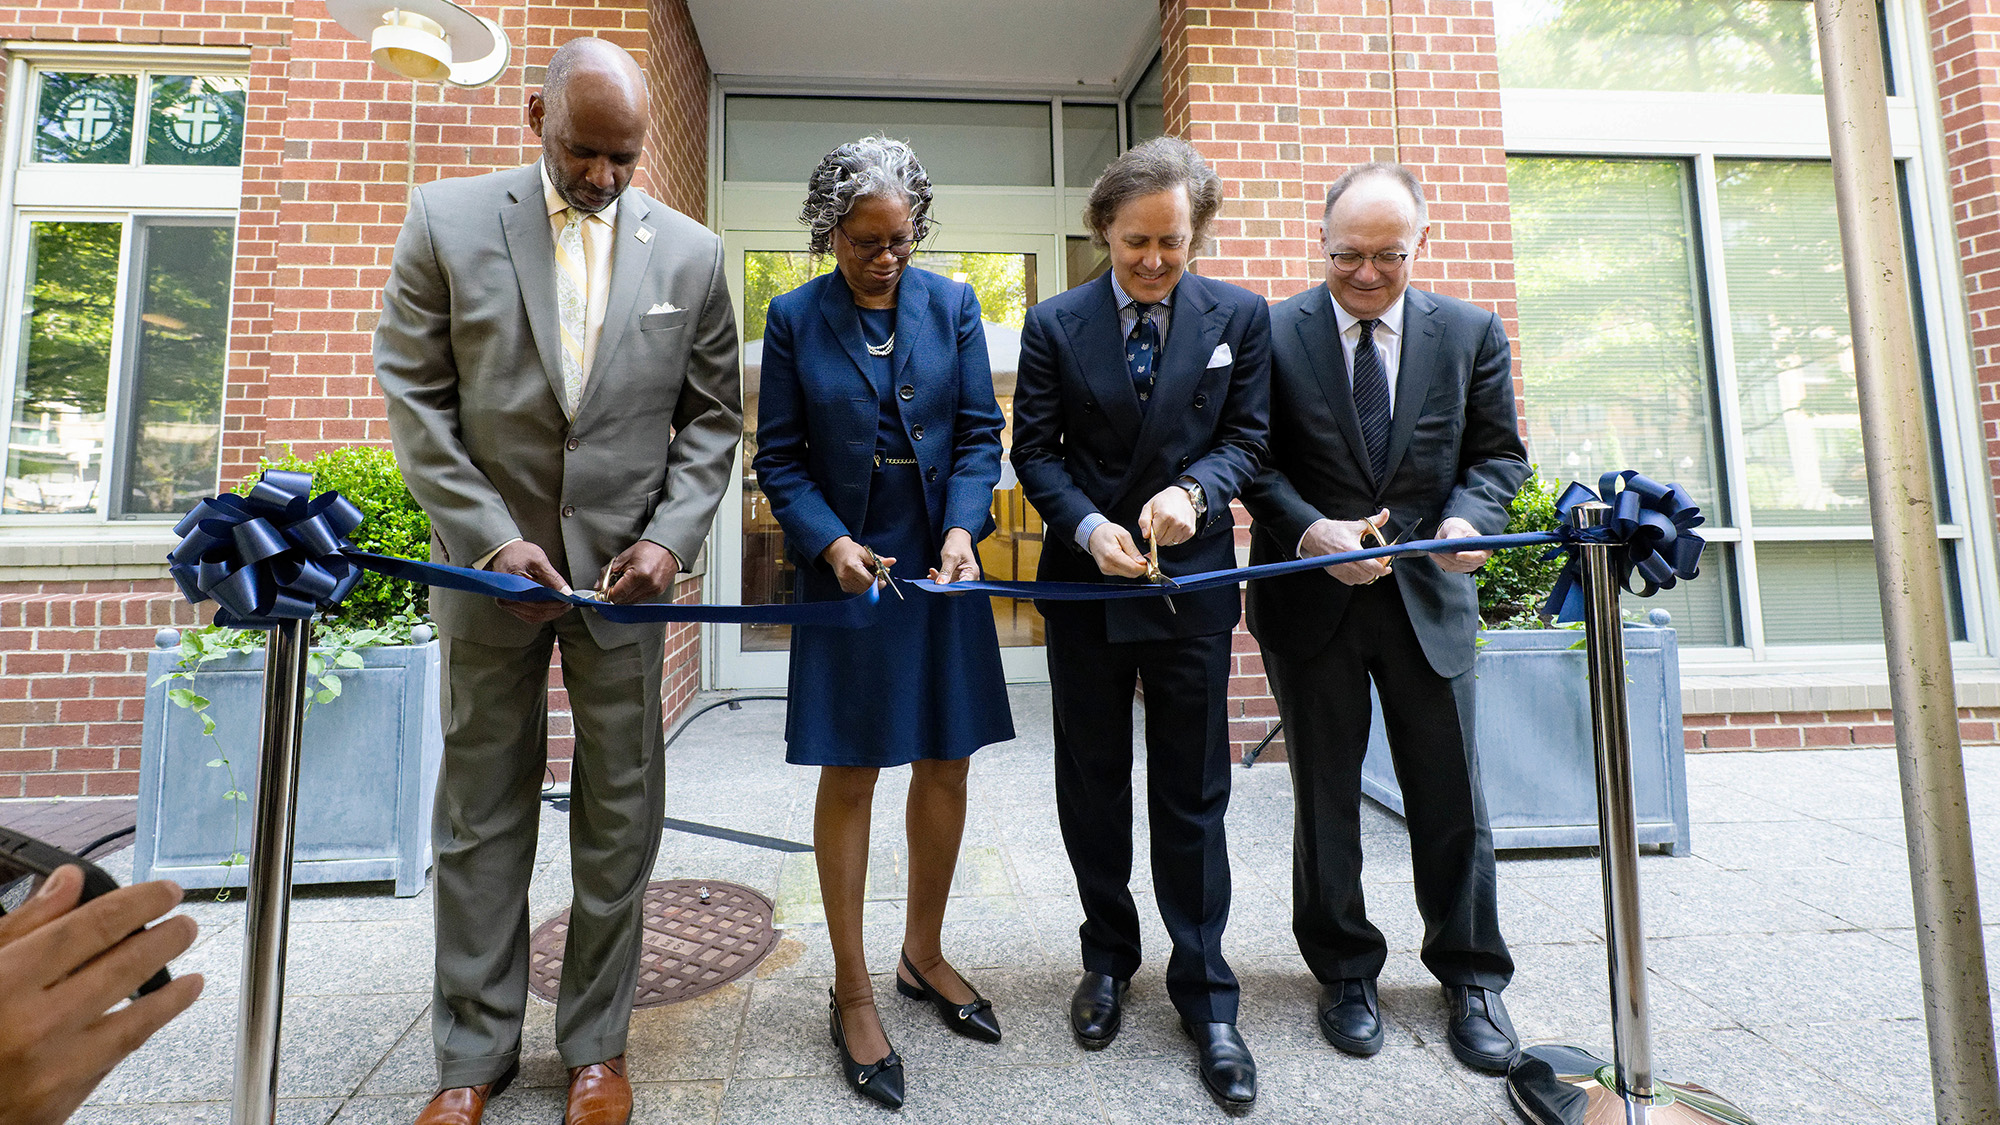 Four individuals cut a ceremonial ribbon in front of the Ralph Lauren Center for Cancer Prevention